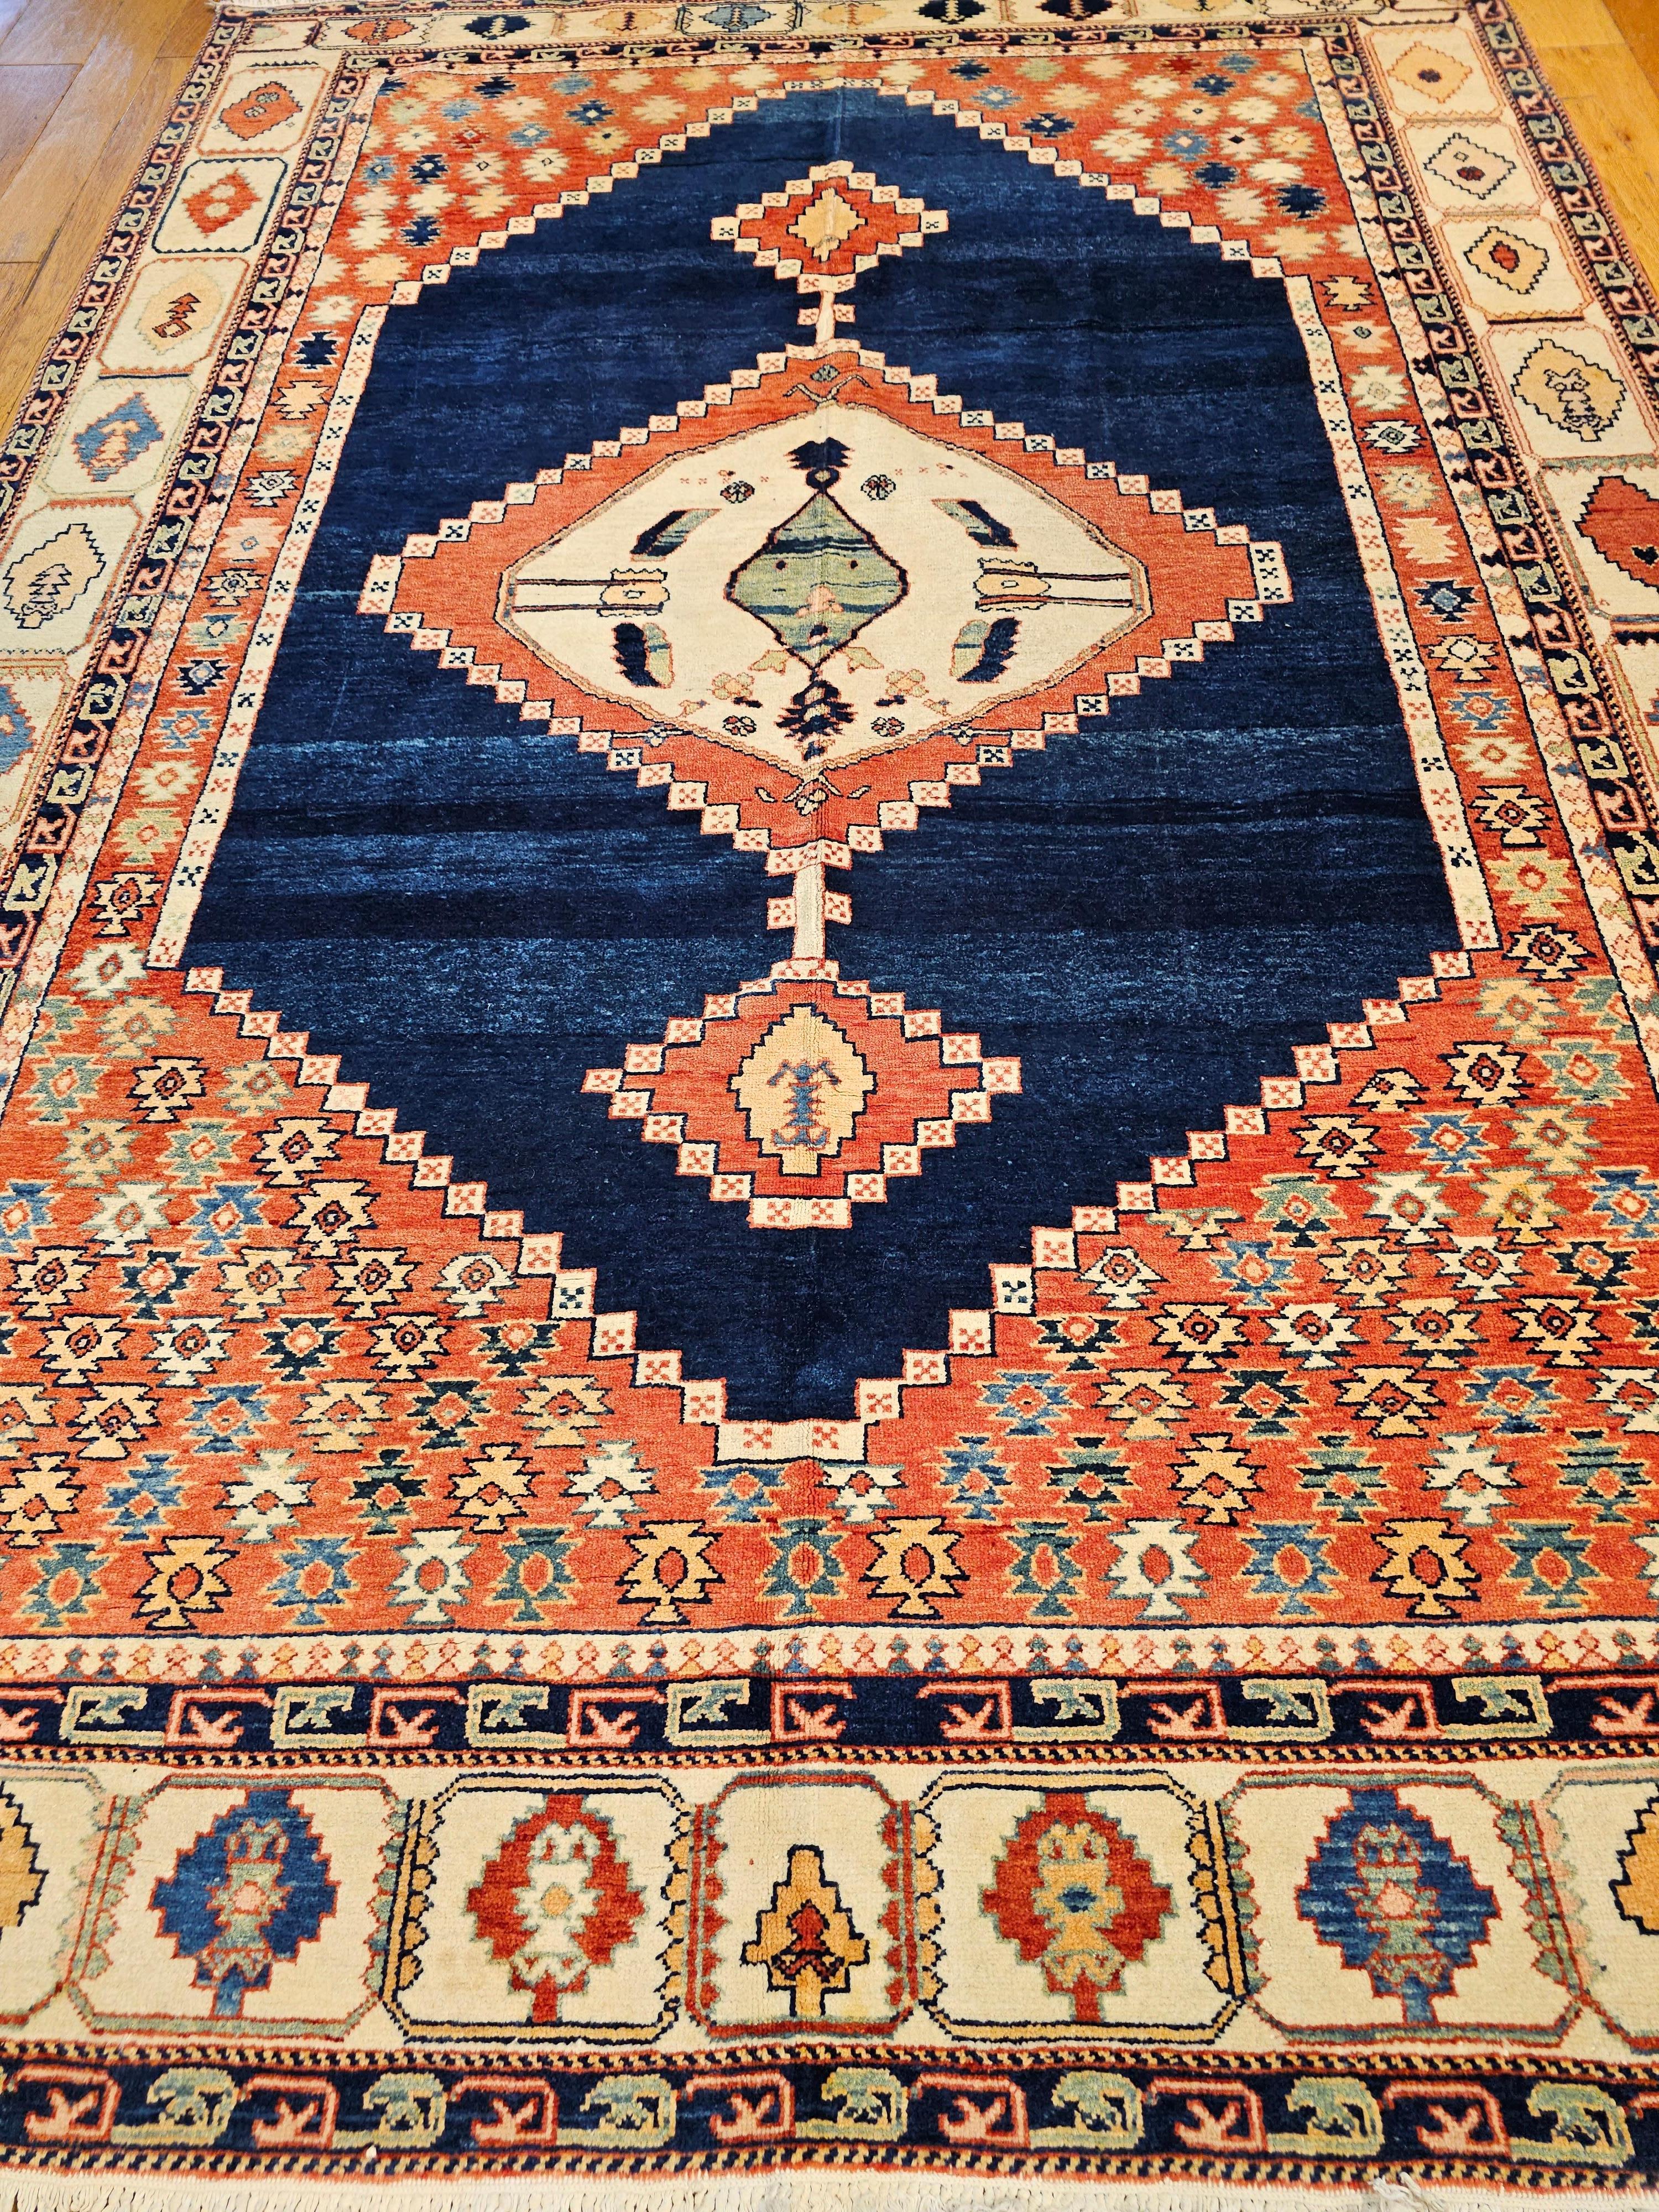 The room size Azari rug has the design of the Serapi rugs from northwestern Persia.  It was woven in Eastern Turkey close to the Azerbaijan province of NW Persia and on the border to the Caucasus region. The Azari Rug weaver has used high-quality